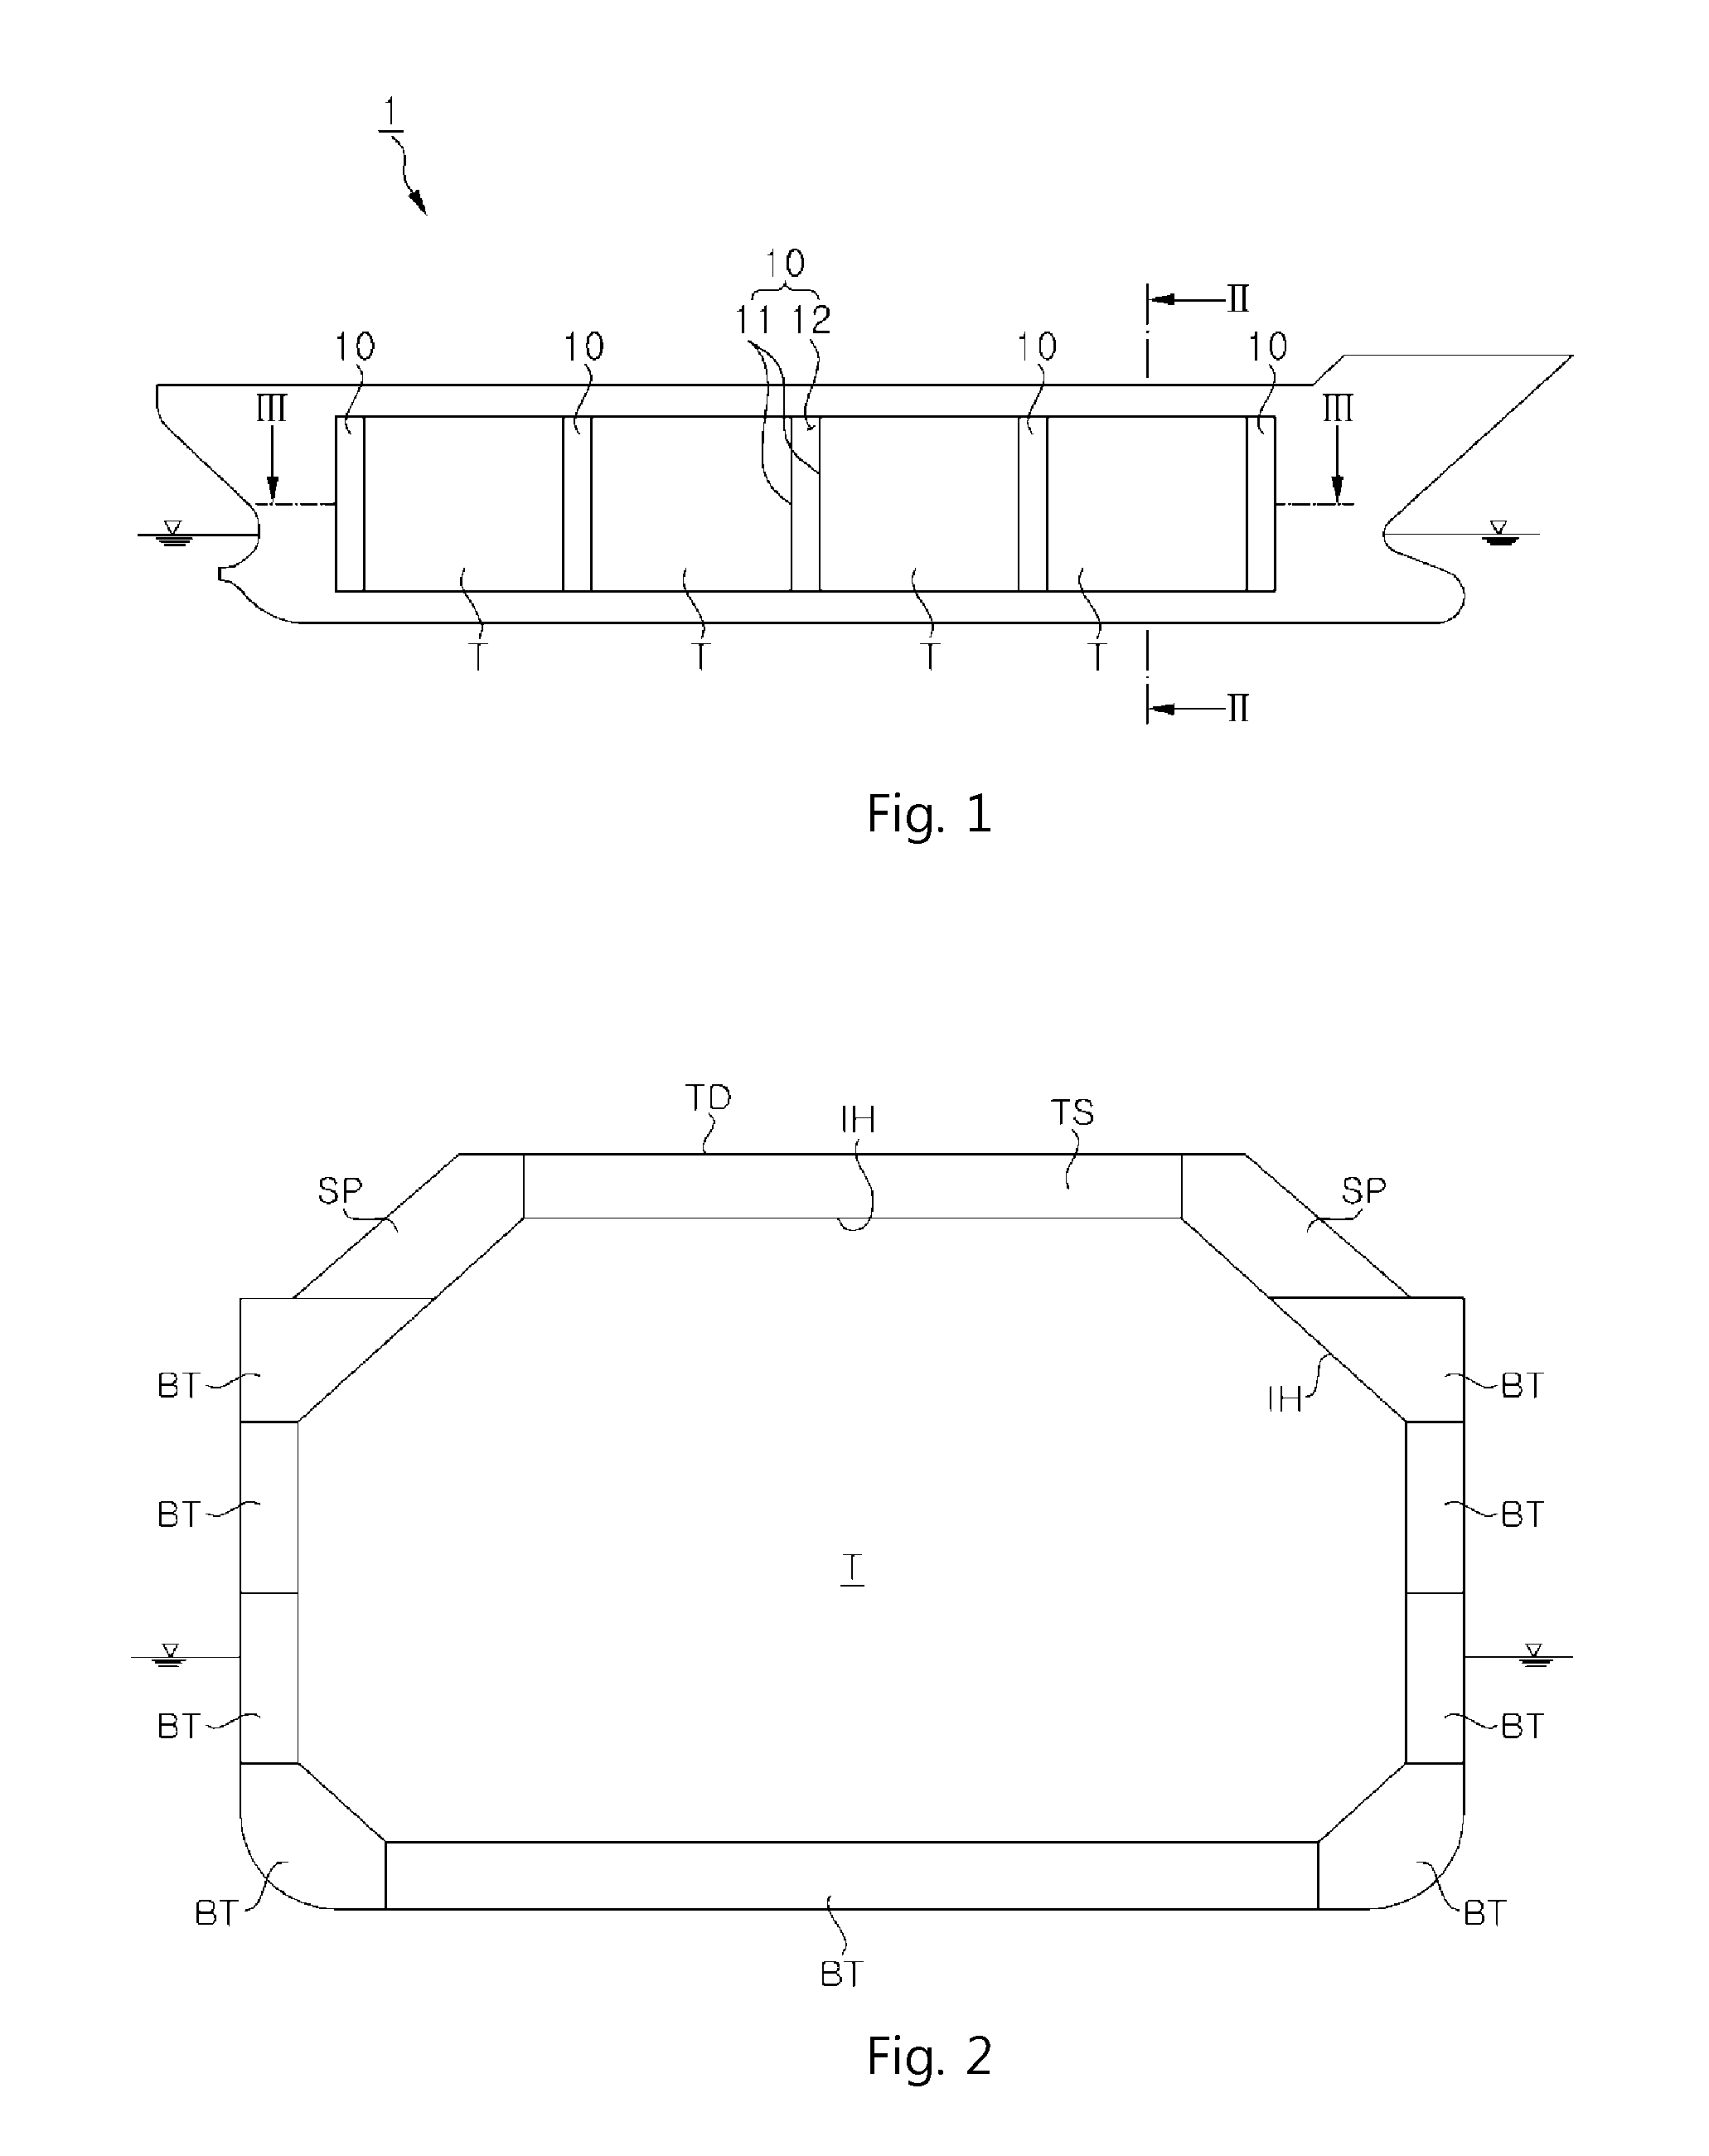 Insulation system for floating marine structure